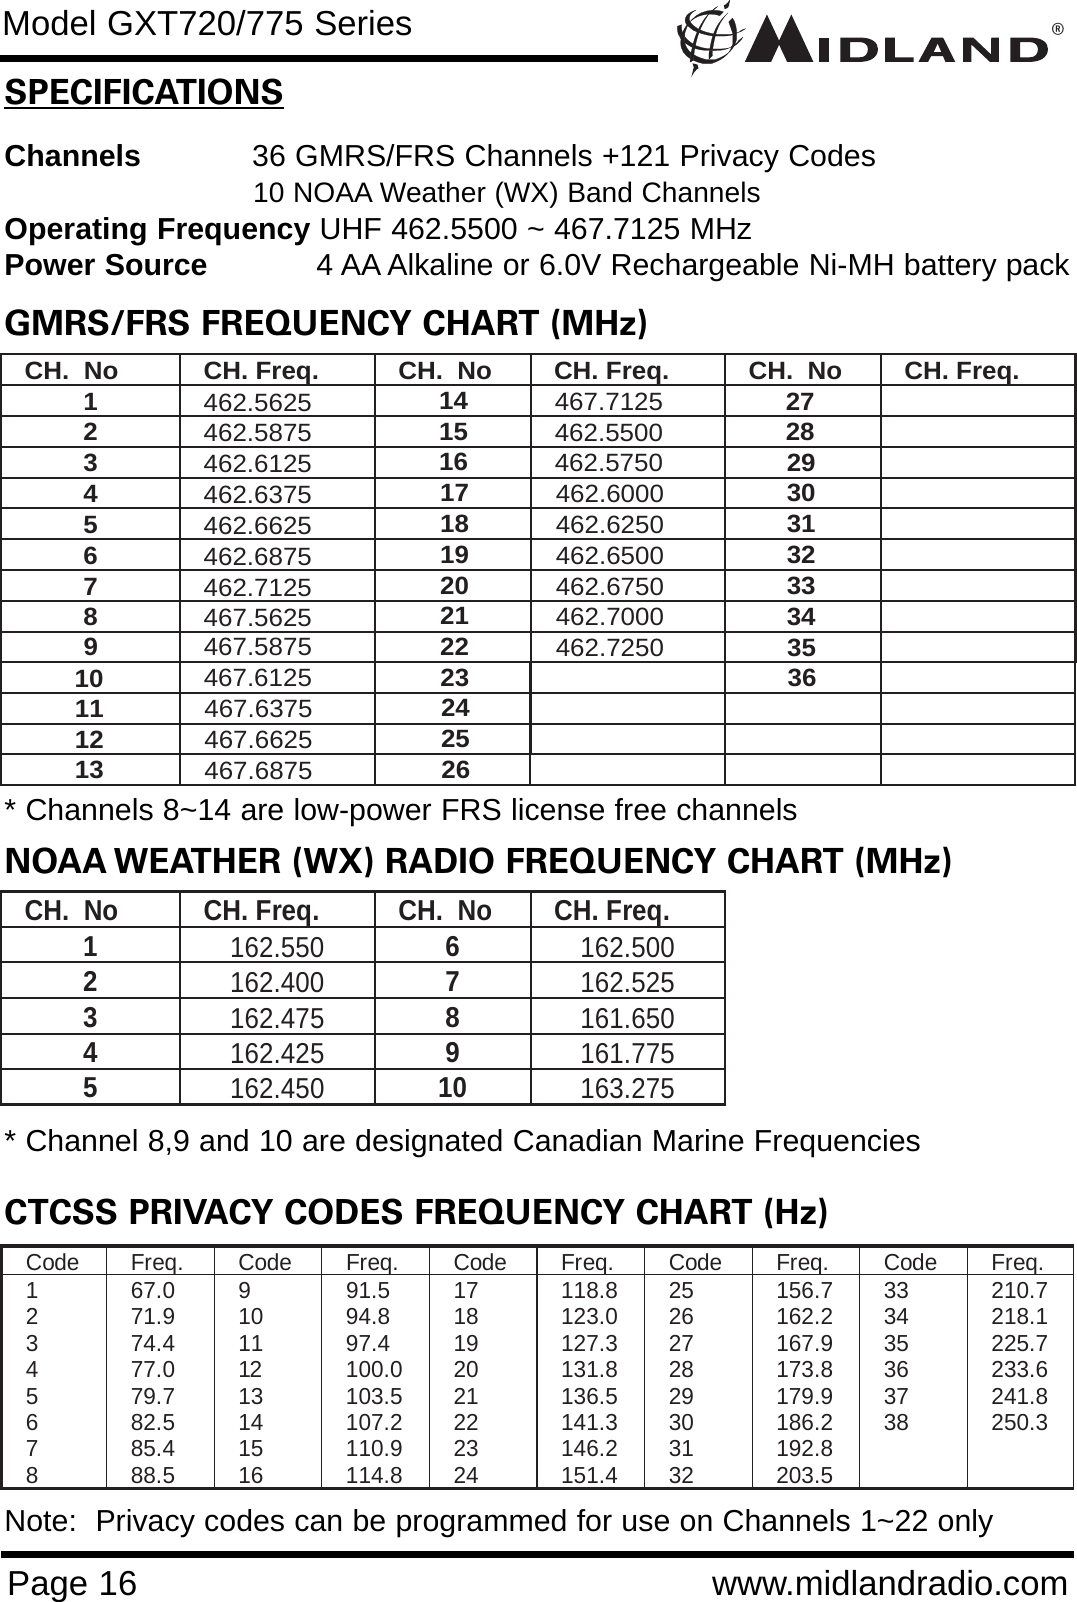 ®Page 16 www.midlandradio.comSPECIFICATIONSChannels 36 GMRS/FRS Channels +121 Privacy Codes10 NOAA Weather (WX) Band Channels Operating Frequency UHF 462.5500 ~ 467.7125 MHzPower Source 4 AA Alkaline or 6.0V Rechargeable Ni-MH battery packGMRS/FRS FREQUENCY CHART (MHz)CH.  No  CH. Freq.  CH.  No  CH. Freq.  CH.  No  CH. Freq. 1  462.5625 9 467.5875 17 462.6000 2  462.5875 10 467.6125 18 462.6250 3  462.6125 11 467.6375 19 462.6500 4  462.6375 12 467.6625 20 462.6750 5  462.6625 13 467.6875 21 462.7000 6  462.6875 14 467.7125 22 462.7250 7  462.7125 15 462.5500   8  467.5625 16 462.5750                                 2324252629303132333427283536NOAA WEATHER (WX) RADIO FREQUENCY CHART (MHz)CH.  No  CH. Freq.  CH.  No  CH. Freq. 1  162.550 6  162.500 2  162.400 7  162.525 3  162.475 8  161.650 4  162.425 9  161.775 5  162.450 10  163.275 CTCSS PRIVACY CODES FREQUENCY CHART (Hz)Code Freq.  Code Freq.  Code Freq.  Code Freq.  Code Freq.  1  67.0 9  91.5 17  118.8 25  156.7 33  210.7 2  71.9 10  94.8 18  123.0 26  162.2 34  218.1 3  74.4 11  97.4 19  127.3 27  167.9 35  225.7 4 77.0 12 100.0 20  131.8 28  173.8 36  233.6 5 79.7 13 103.5 21  136.5 29  179.9 37  241.8 6 82.5 14 107.2 22  141.3 30  186.2 38  250.3 7 85.4 15 110.9 23  146.2 31  192.8    8 88.5 16 114.8 24  151.4 32  203.5    * Channel 8,9 and 10 are designated Canadian Marine Frequencies* Channels 8~14 are low-power FRS license free channelsNote:  Privacy codes can be programmed for use on Channels 1~22 onlyModel GXT720/775 Series